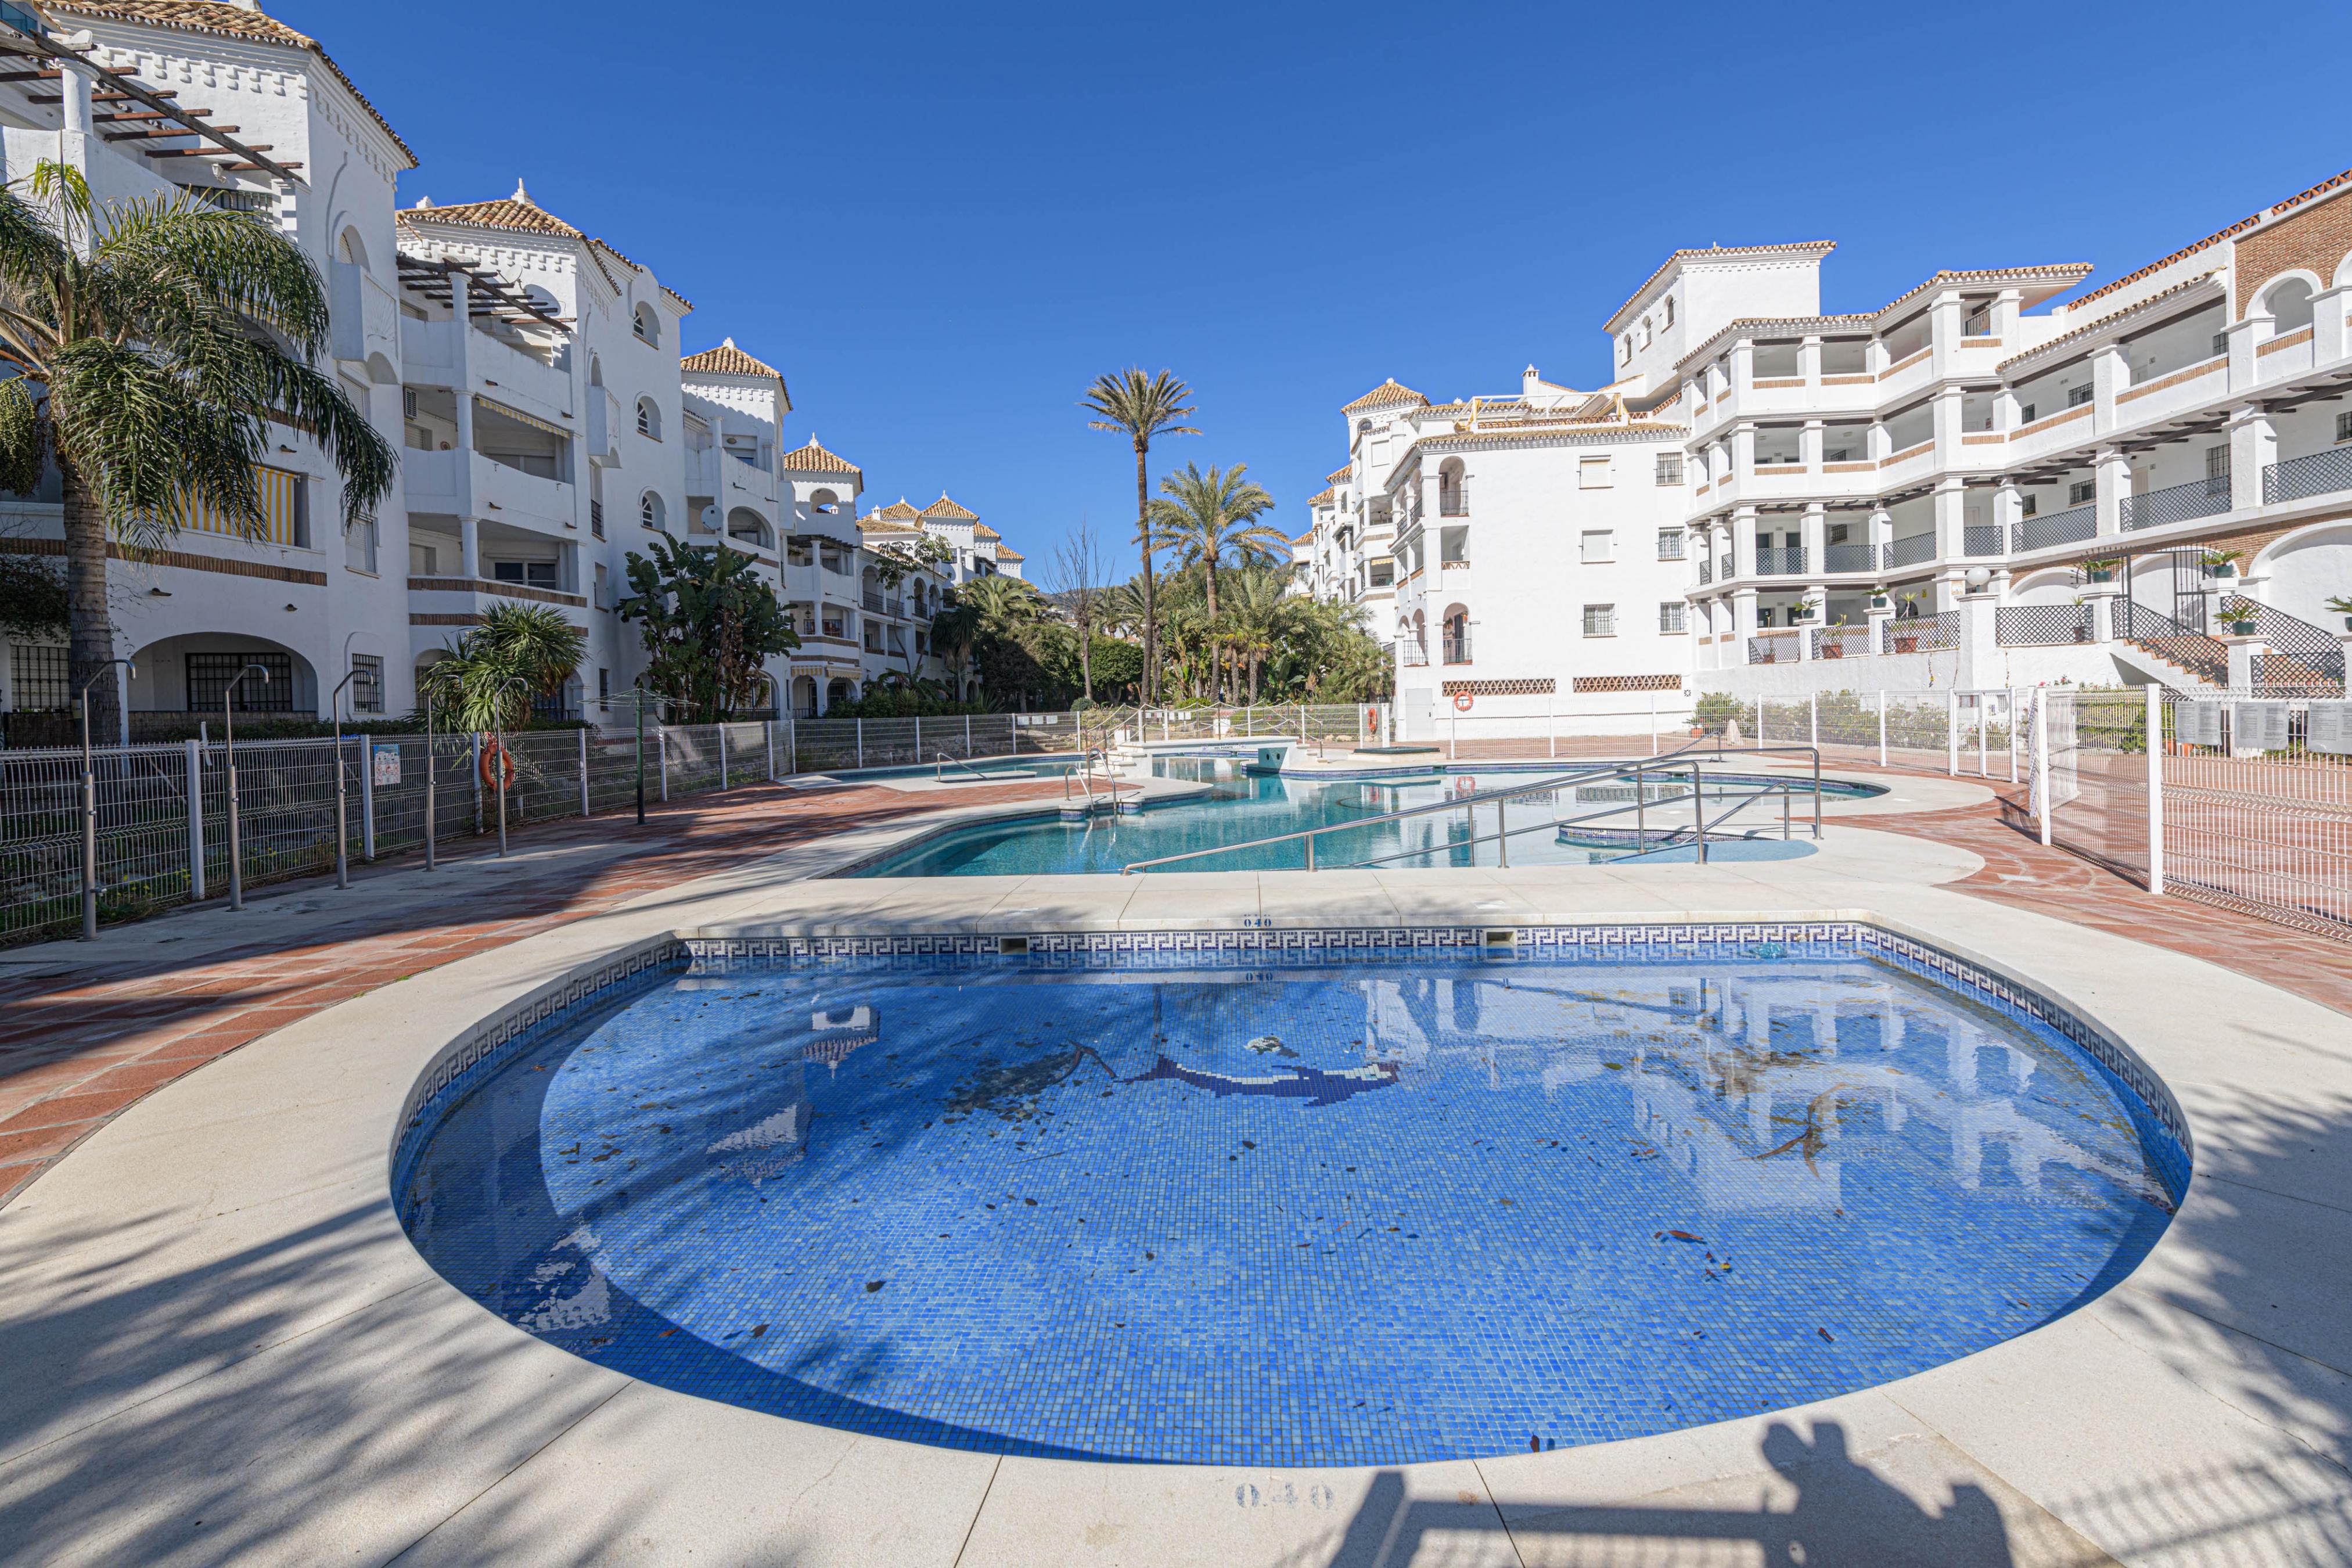 Property Image 2 - BENALMAR PLAYA - Cozy apartment with shared pool a few meters from the beach. Free WIFI.